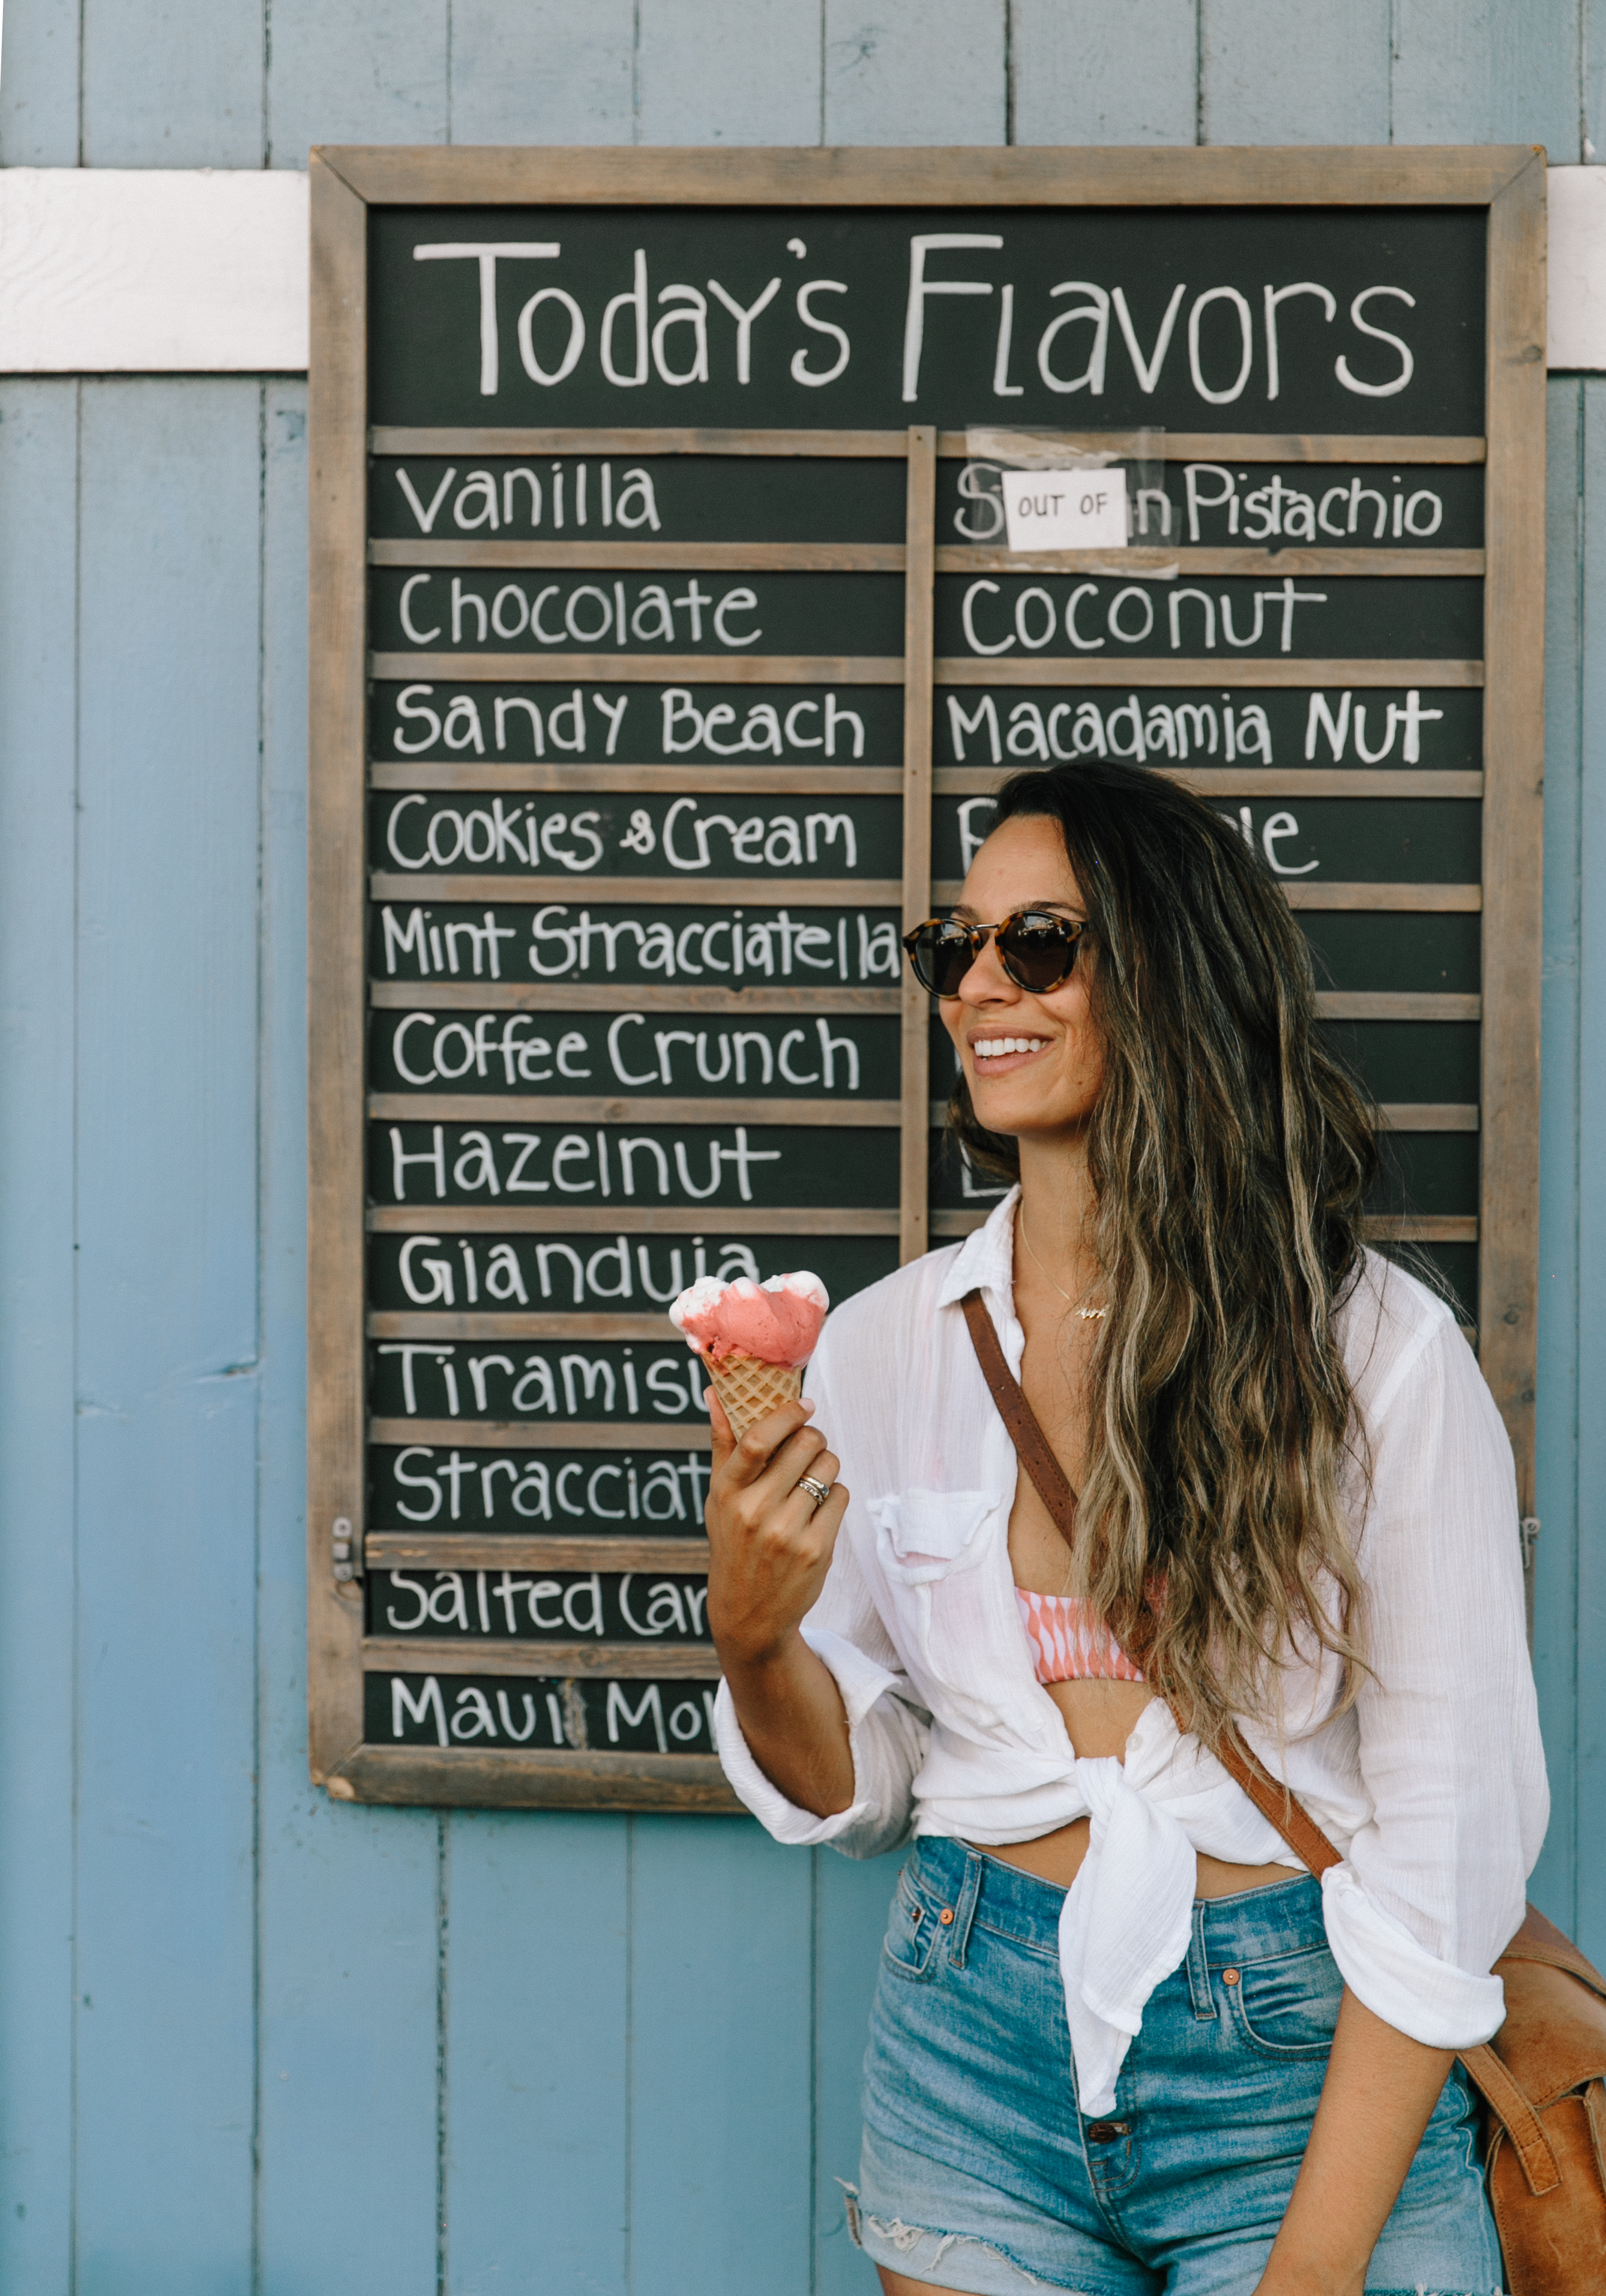 Cute Gelato Place in Maui | Ono Gelato | Things To Do In Lahaina | Things To Do in West Maui | Travel Inspiration | Hawaiian Island Hopping | Weekend In Maui | Guide to Spending The Weekend in Maui | Travel Blogger's Maui Recommendations via @elanaloo + elanaloo.com